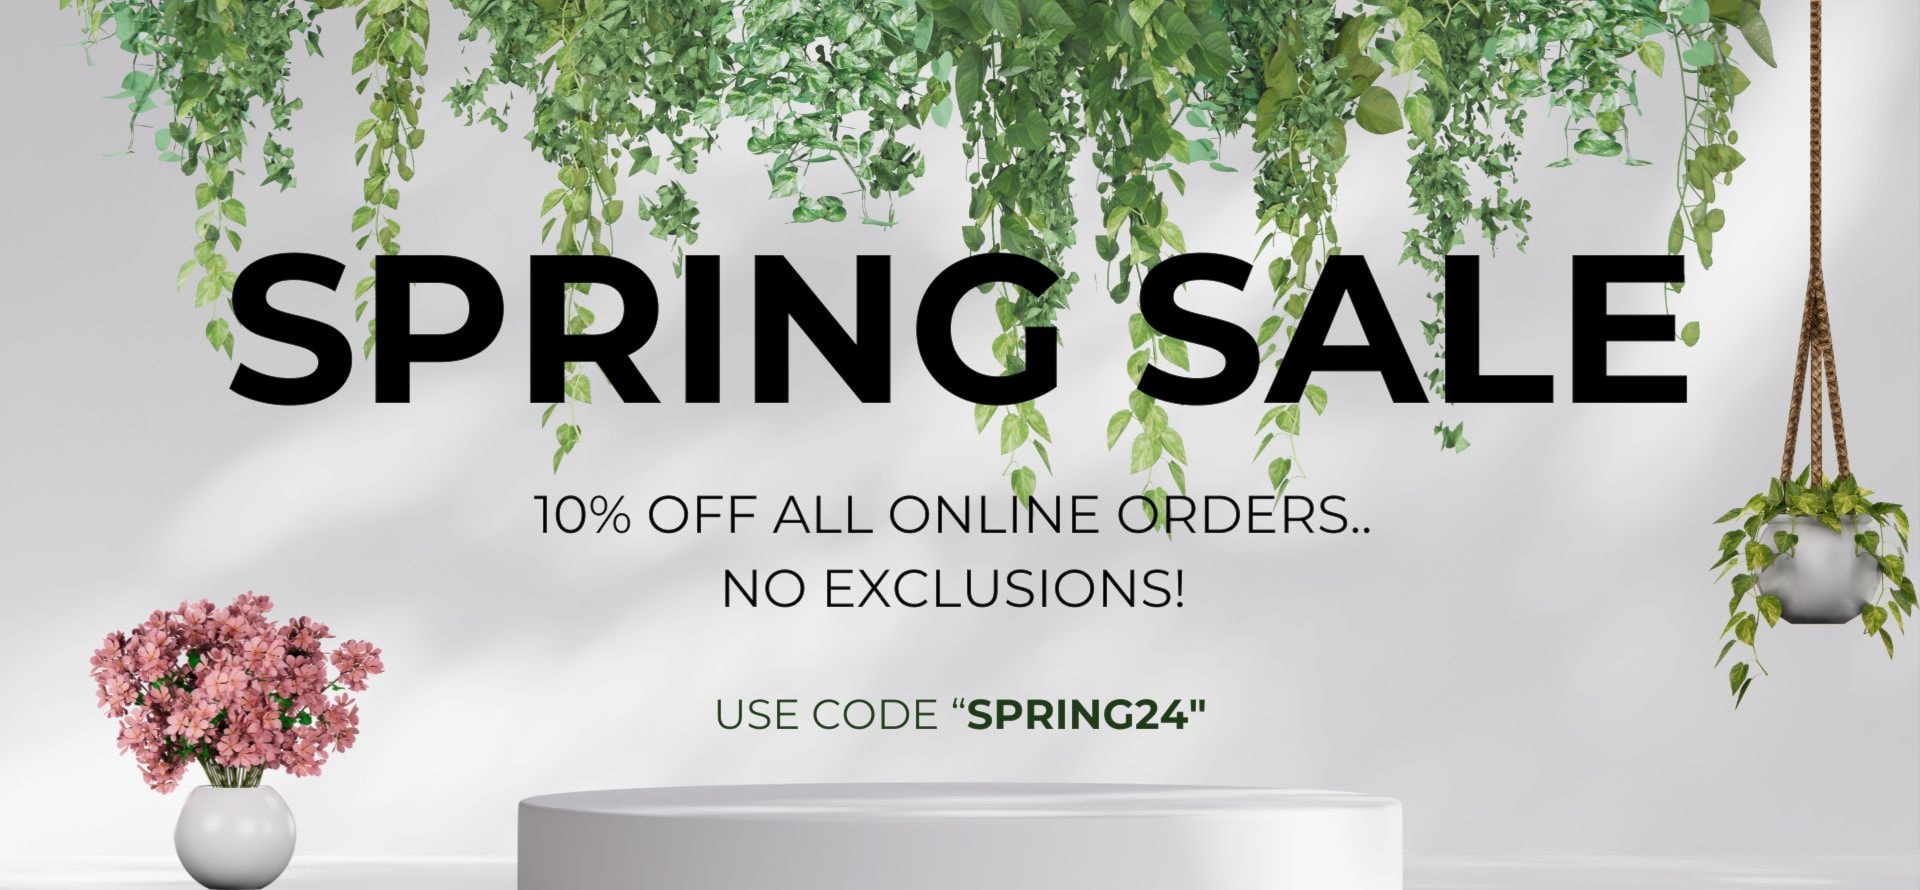 Spring Sale 10% Off all online orders no exclusions use code SPRING24